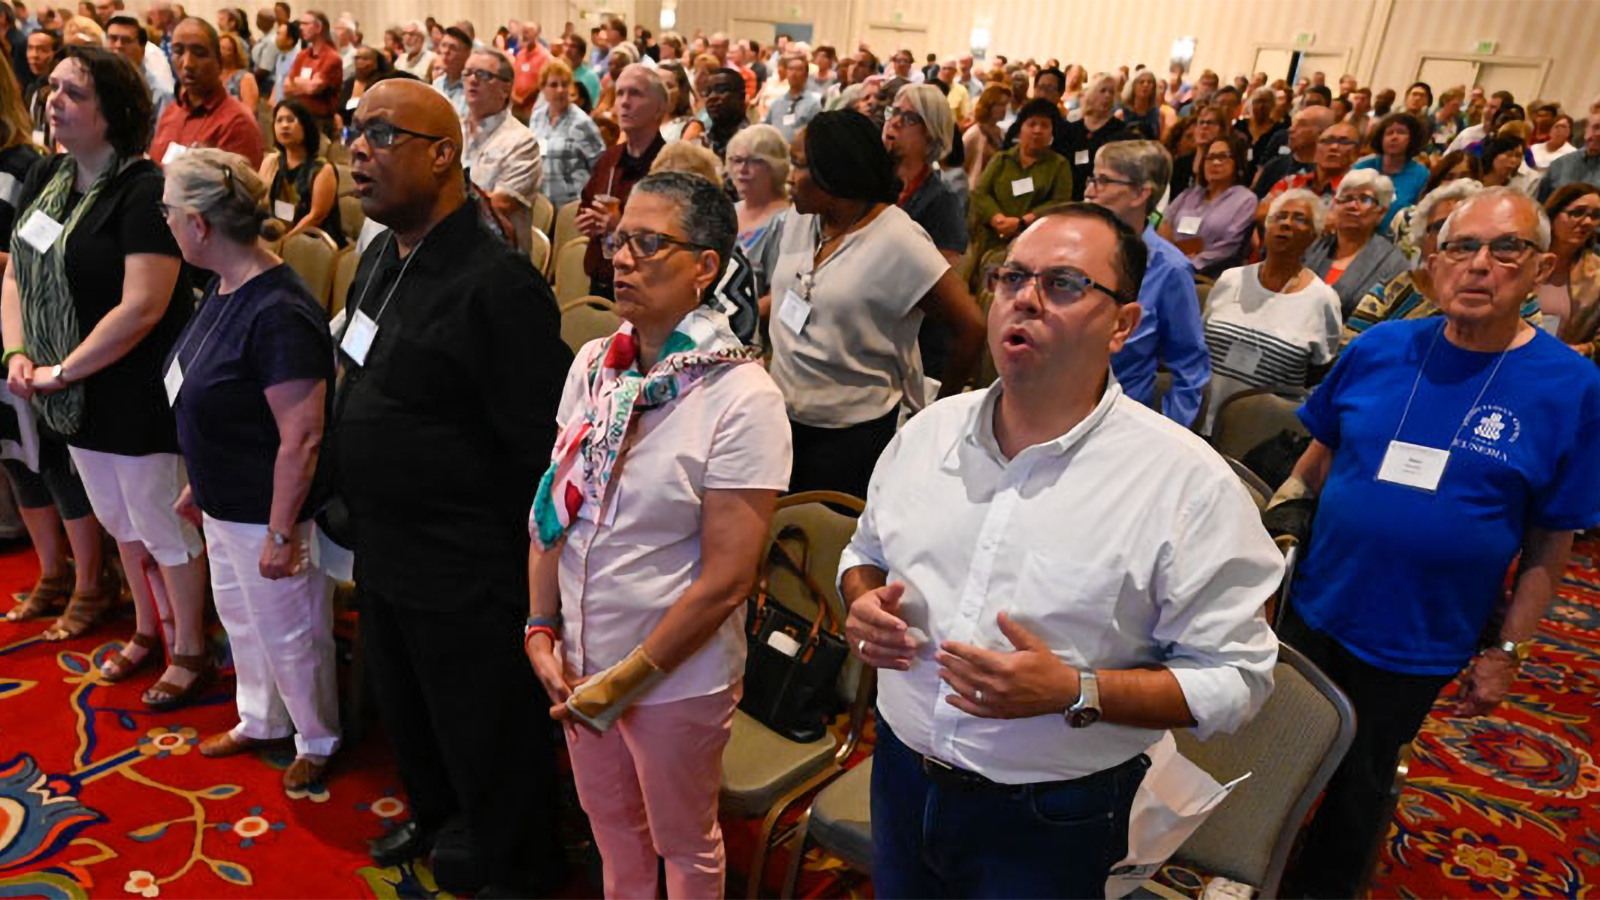 Nearly 800 Presbyterians are gathered in Baltimore through Saturday for Big Tent. (Photo by Rich Copley)